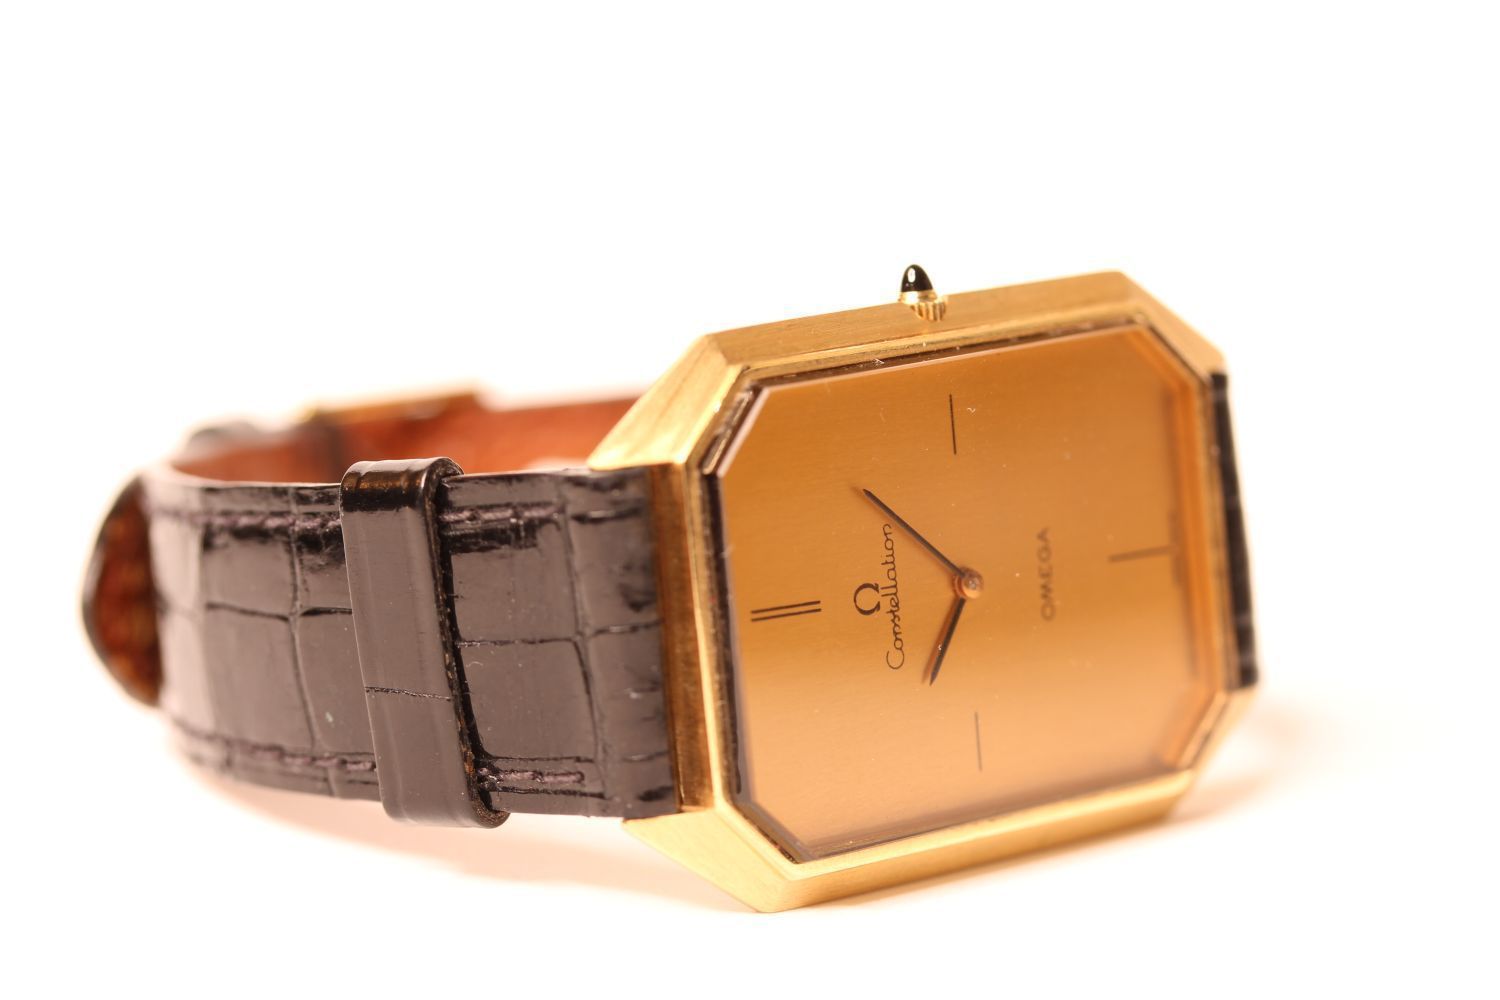 GENTLEMENS OMEGA CONSTELLATION OVERSIZE WRISTWATCH, champagne dial with a raised glass, 30mm case, - Image 3 of 3